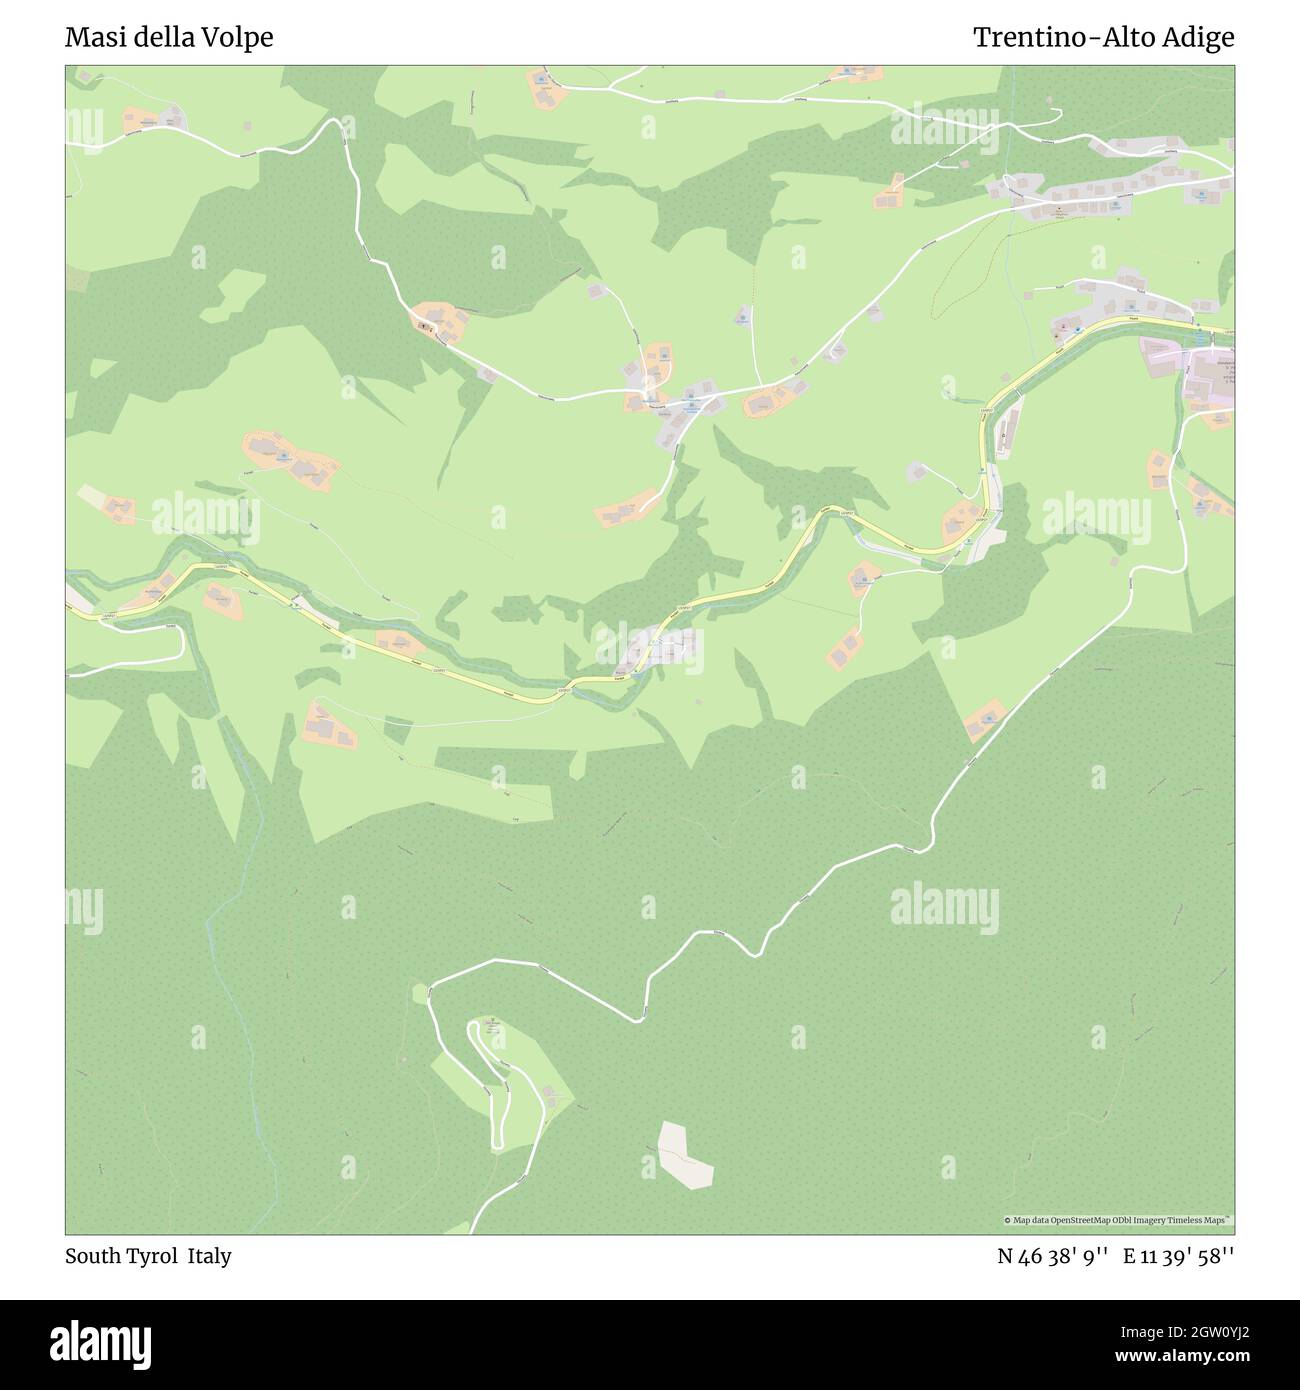 Masi della Volpe, South Tyrol, Italy, Trentino-Alto Adige, N 46 38' 9'', E 11 39' 58'', map, Timeless Map published in 2021. Travelers, explorers and adventurers like Florence Nightingale, David Livingstone, Ernest Shackleton, Lewis and Clark and Sherlock Holmes relied on maps to plan travels to the world's most remote corners, Timeless Maps is mapping most locations on the globe, showing the achievement of great dreams Stock Photo